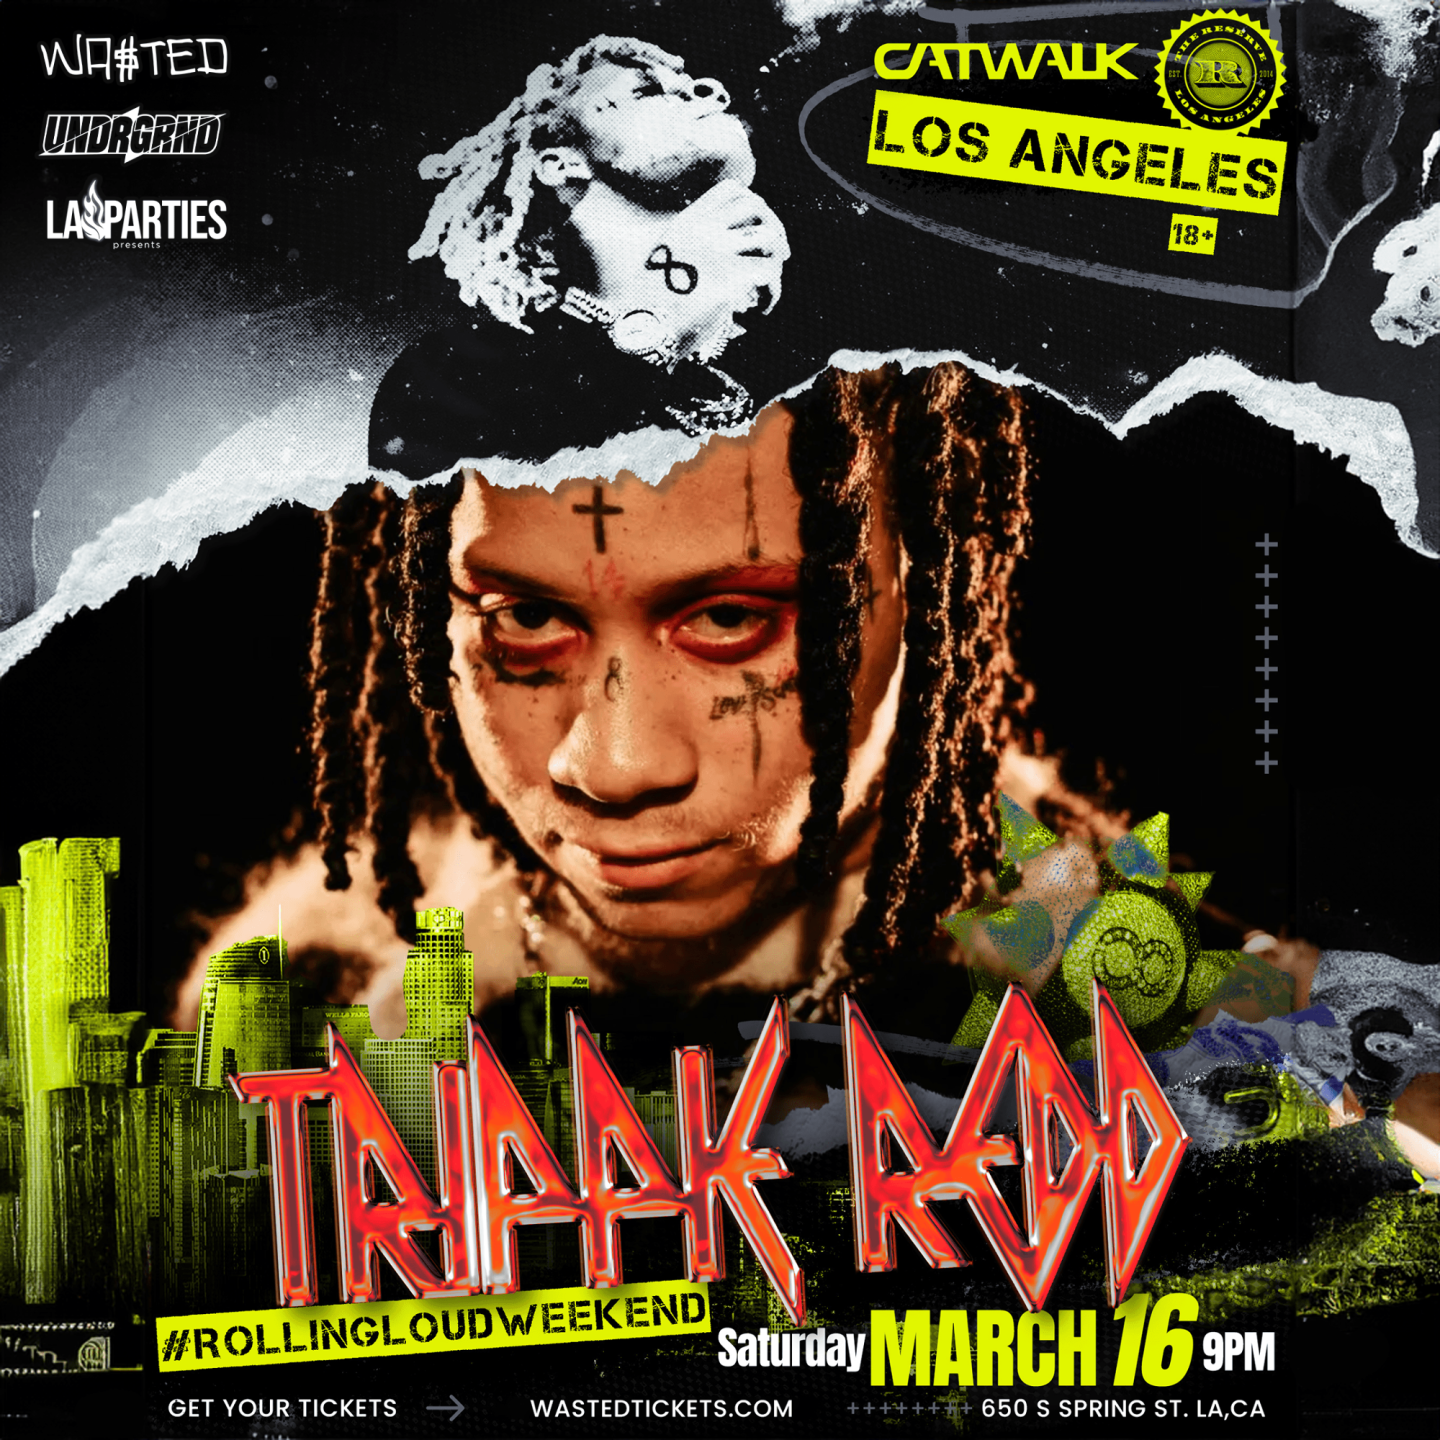 Wasted and Underground Presents Rolling Loud Weekend Reserve x CatWalk with Trippi Redd